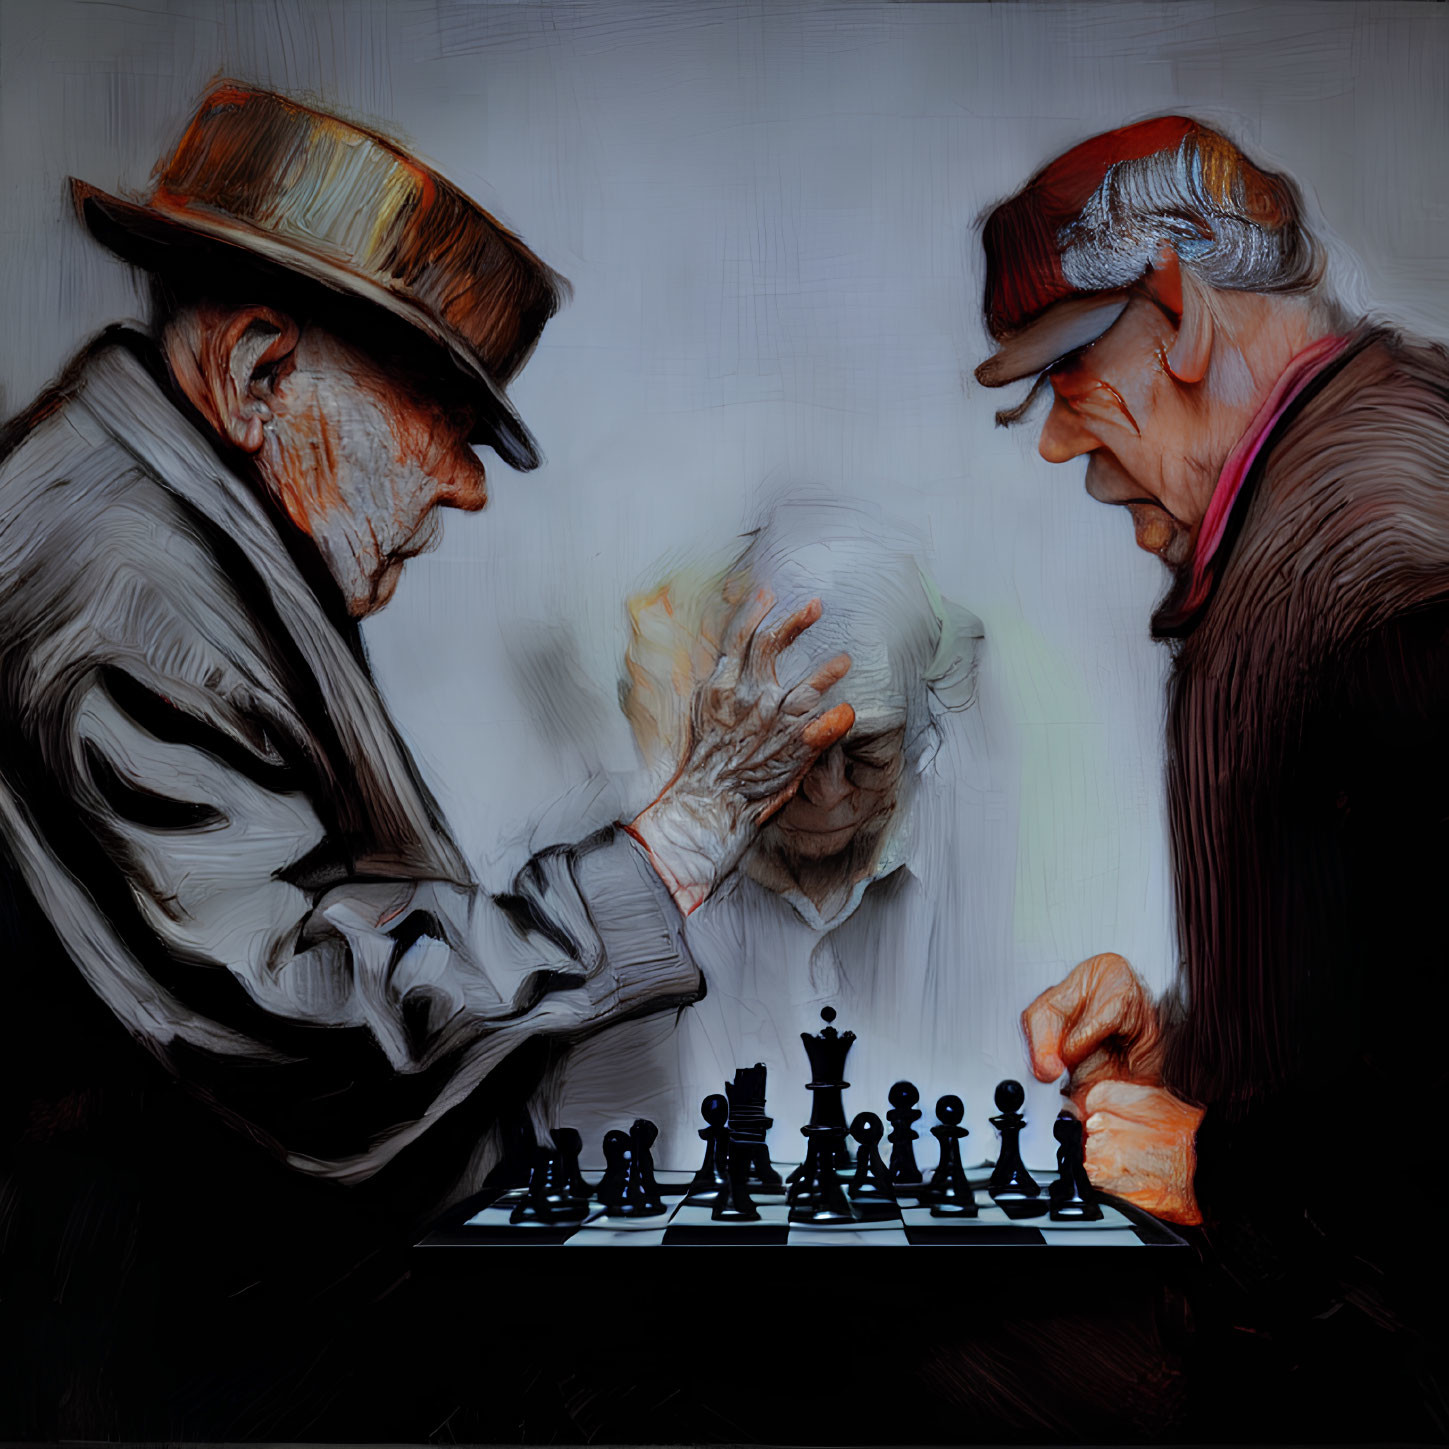 Elderly gentlemen playing chess with intense concentration